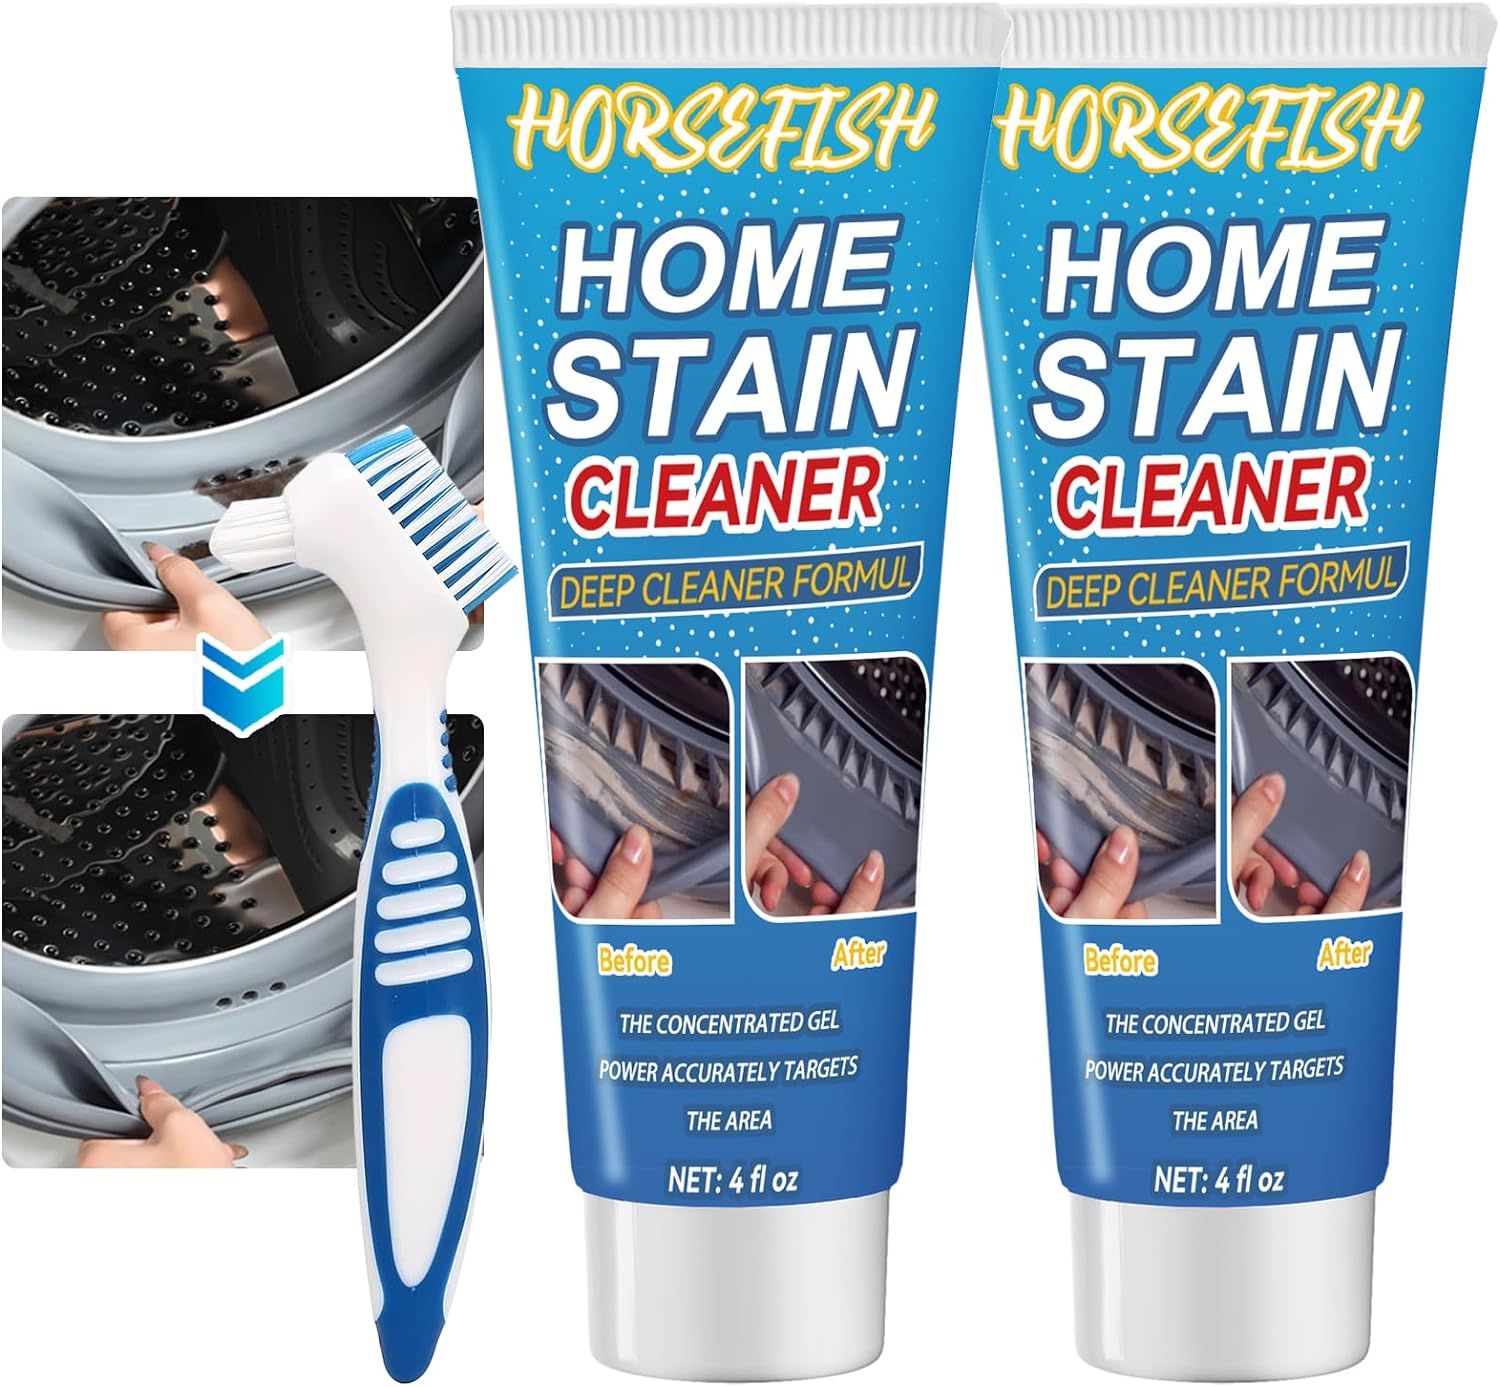 The Horseshoe Mold Remover Gel has proven to be a game-changer in my household cleaning routine. The 2 Pack offers excellent value for money, addressing not only washing machine mold but also providing versatility for refrigerator strips and various household surfaces.What stands out about this mold remover is its gel consistency. The thick gel adheres well to vertical surfaces, ensuring prolonged contact for maximum efficacy. It' particularly effective in reaching hidden and hard-to-access are